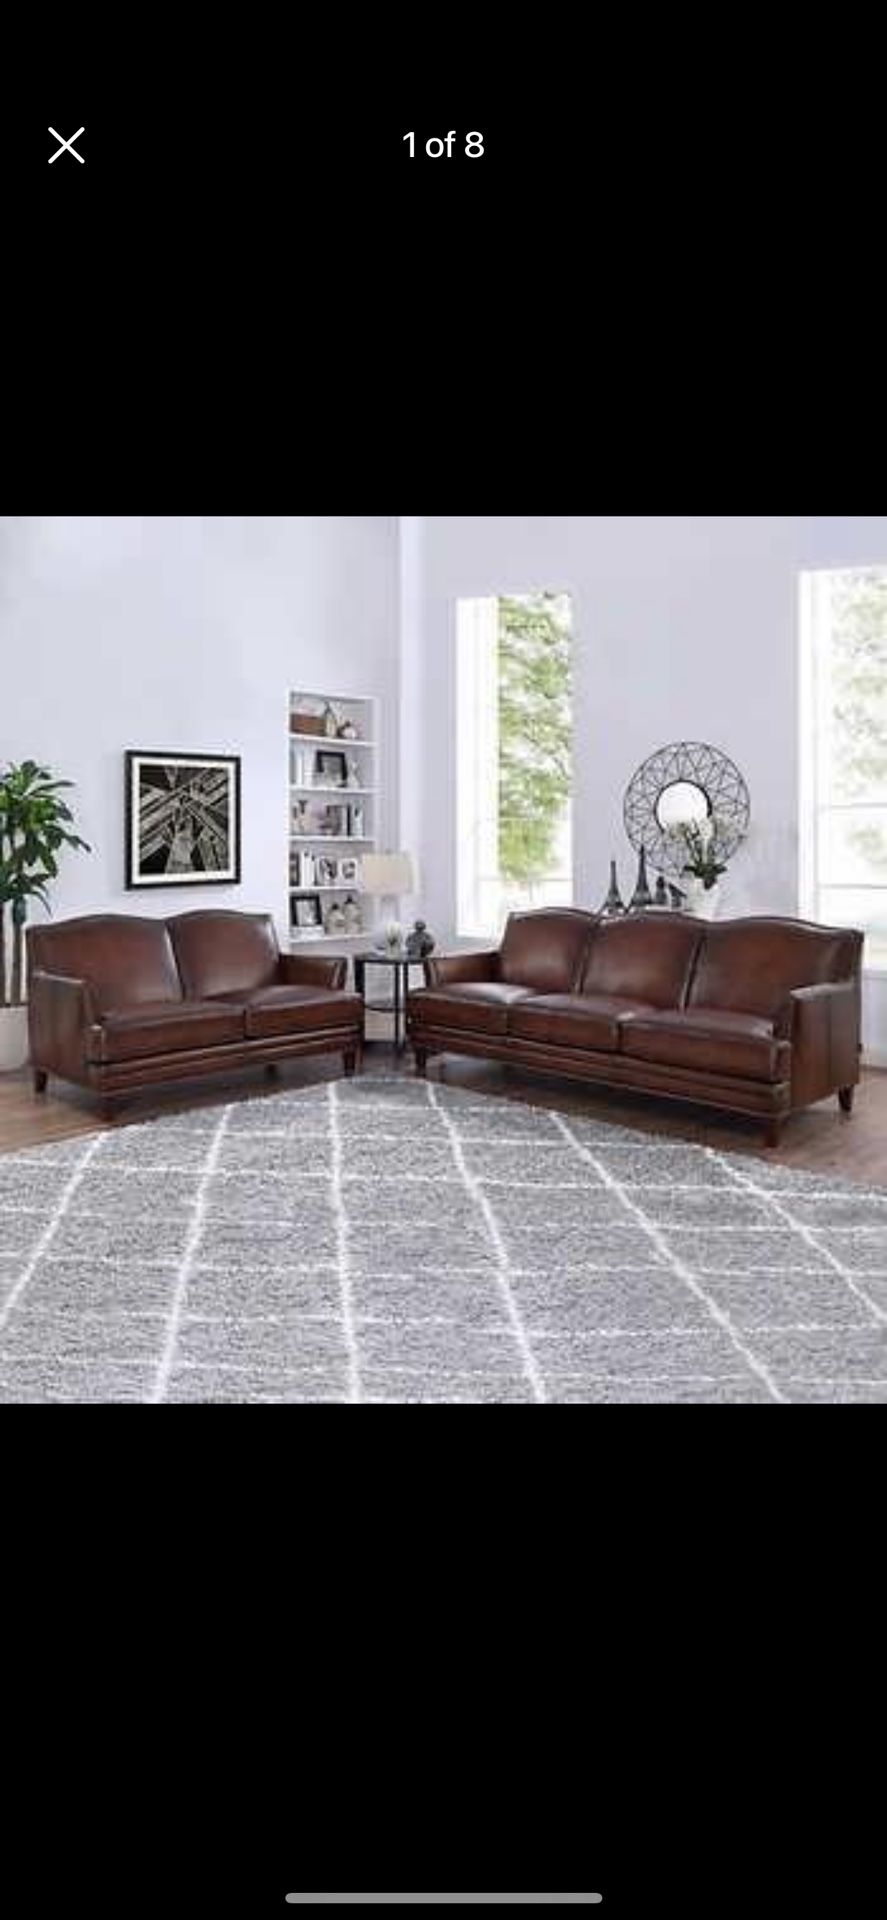 LEATHER SOFA AND LEATHER SOFA SET **TODAY ONLY**BRAND NEW DEMO MODEL FROM COSTCO!!!